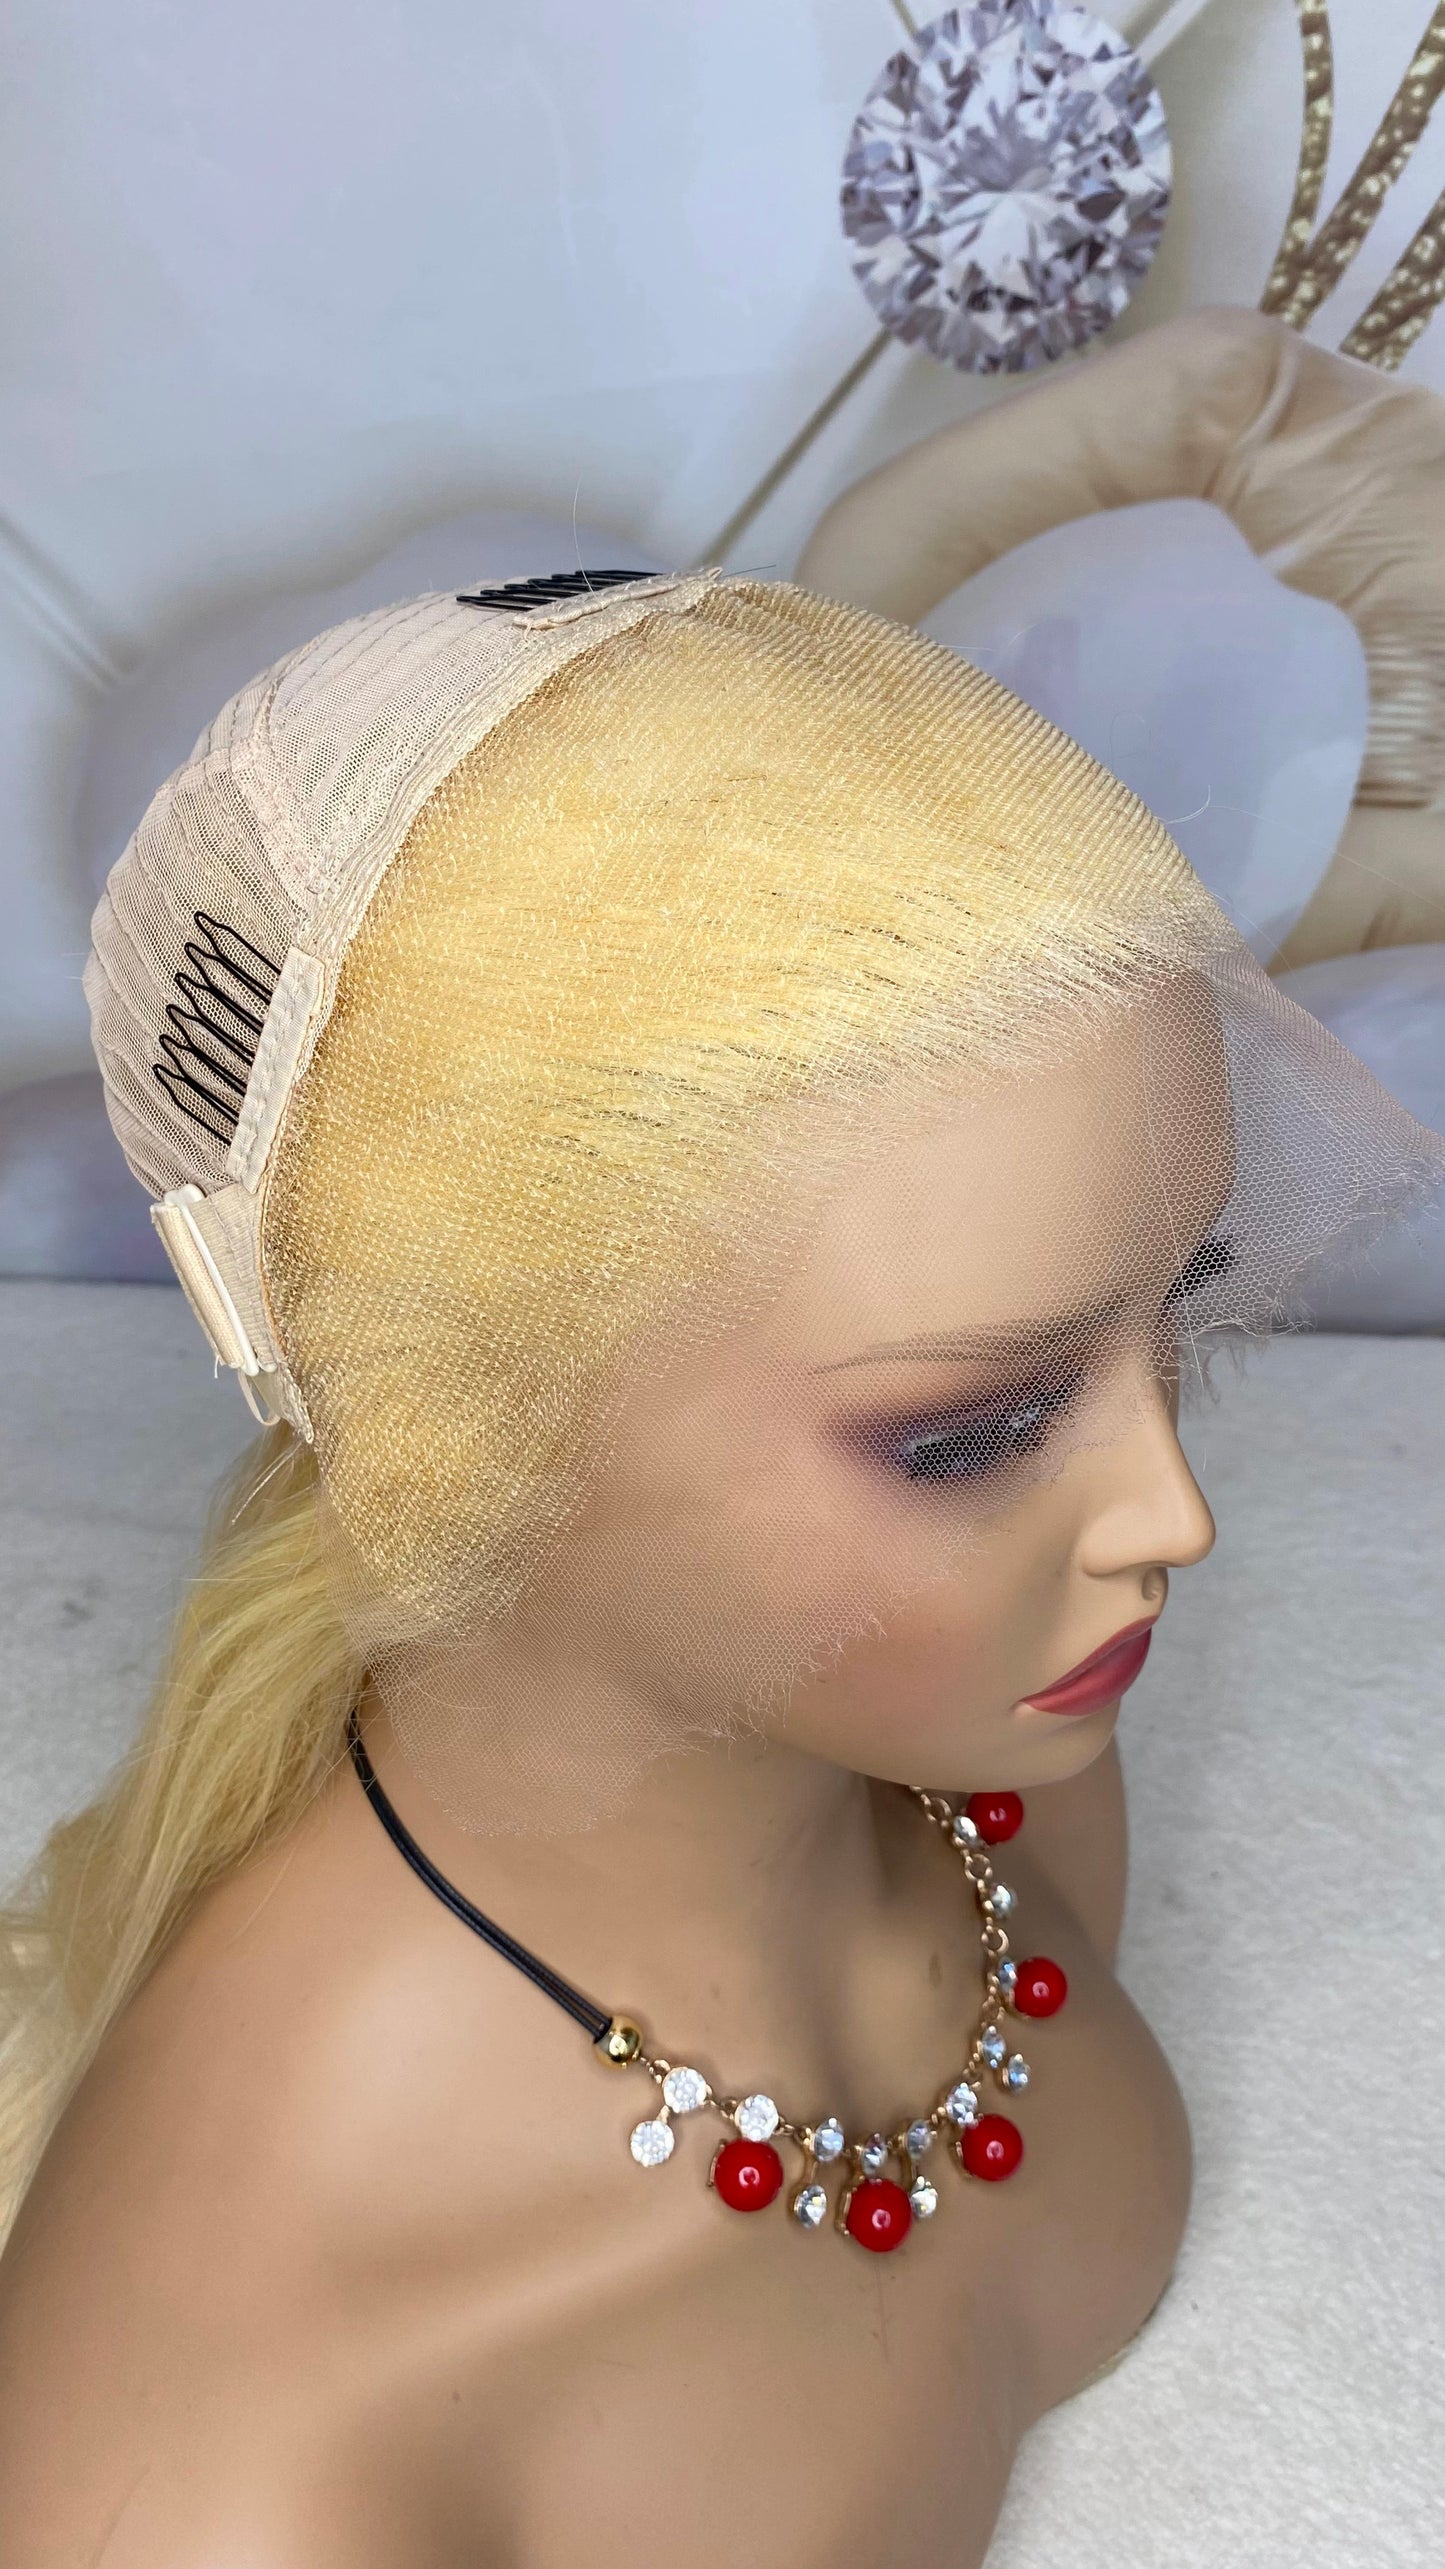 Blonde 613# 13x4 HD lace full frontal wig